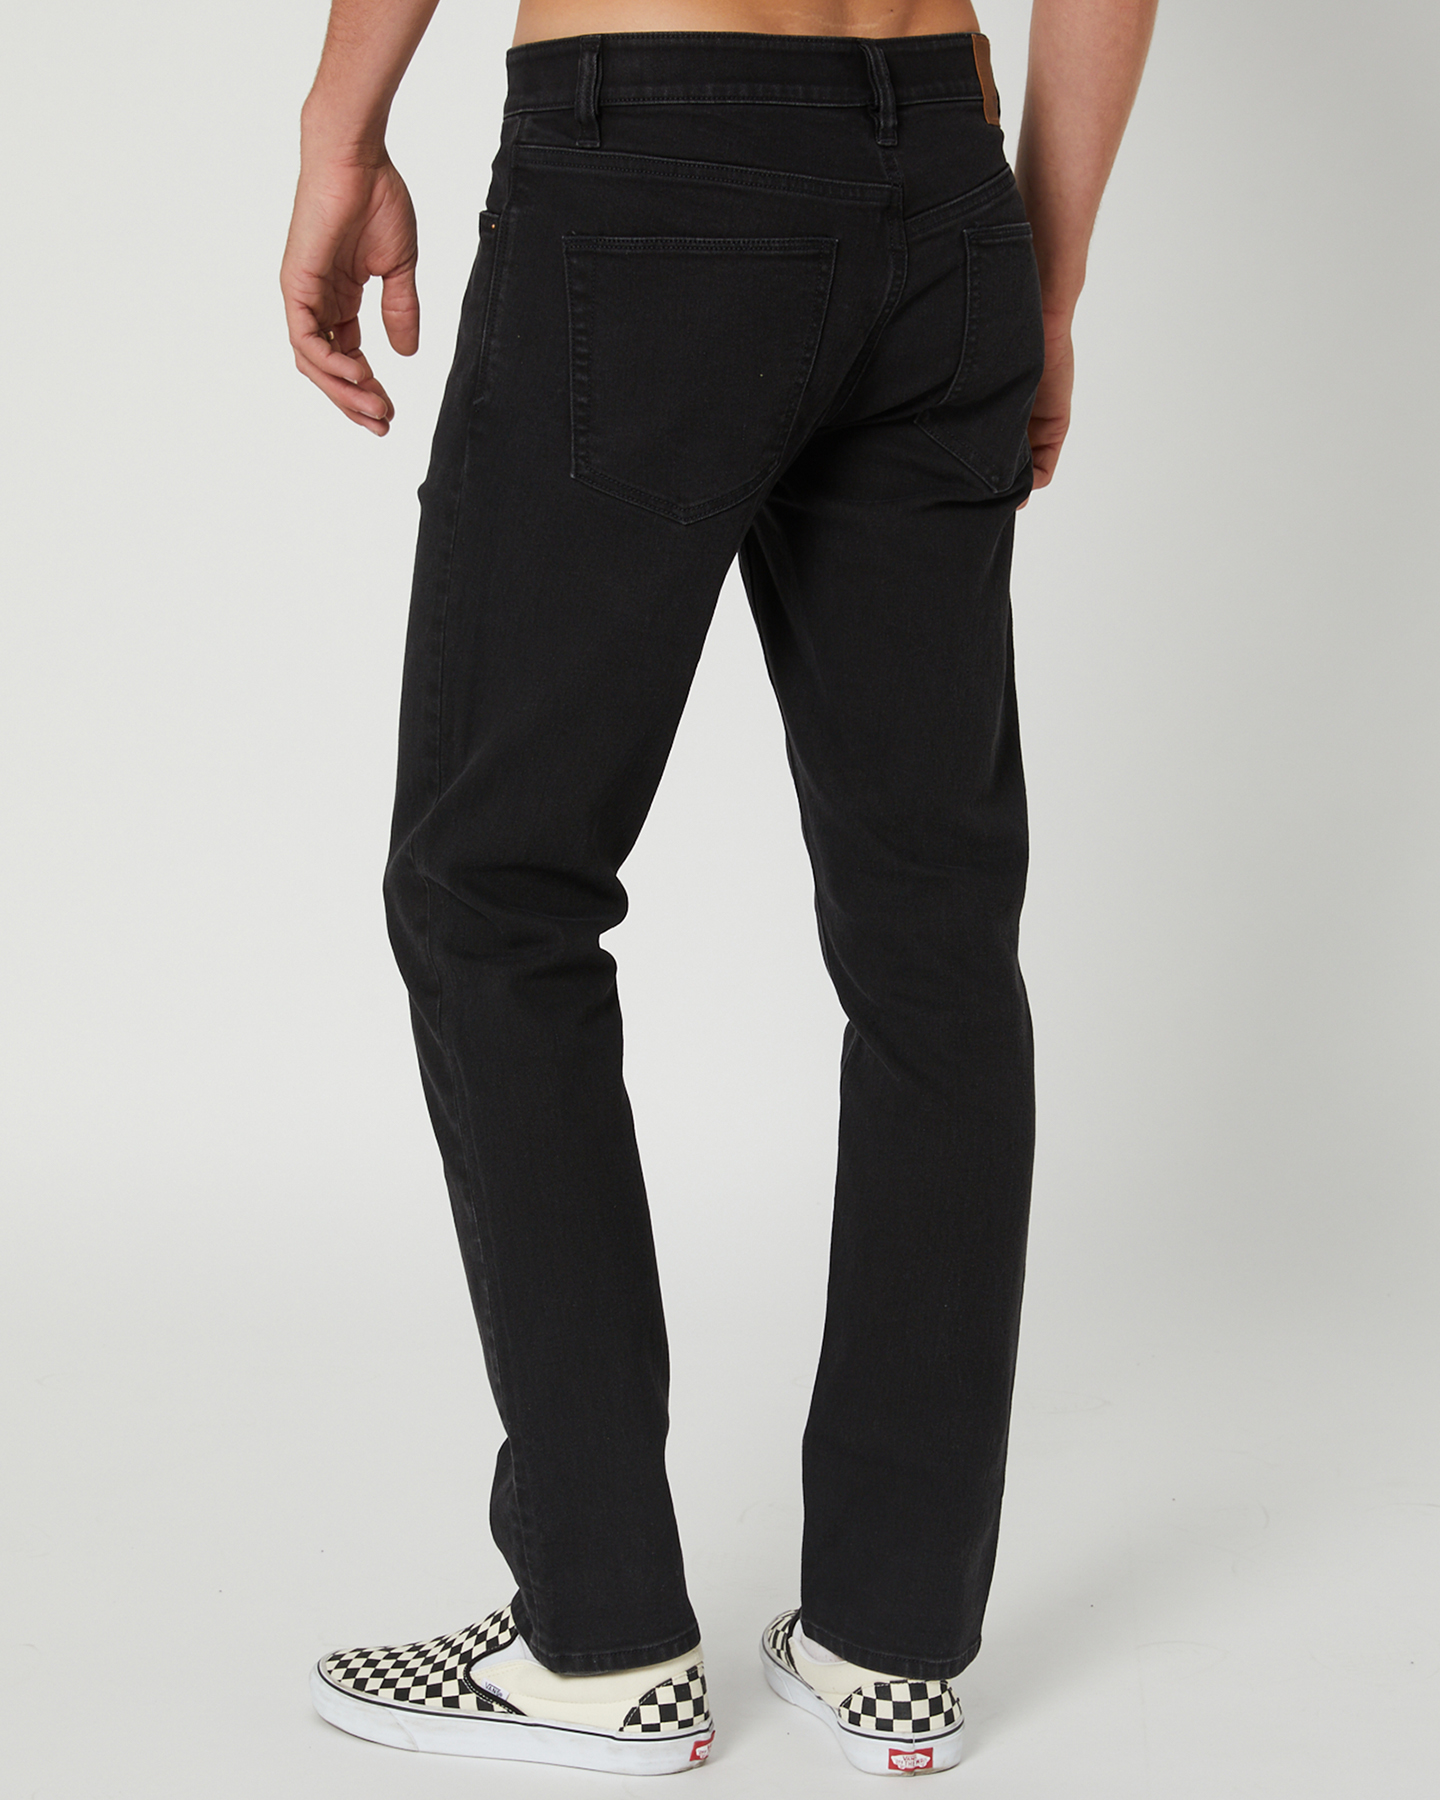 Volcom 2X4 Tapered Mens Jean - Black Out | SurfStitch